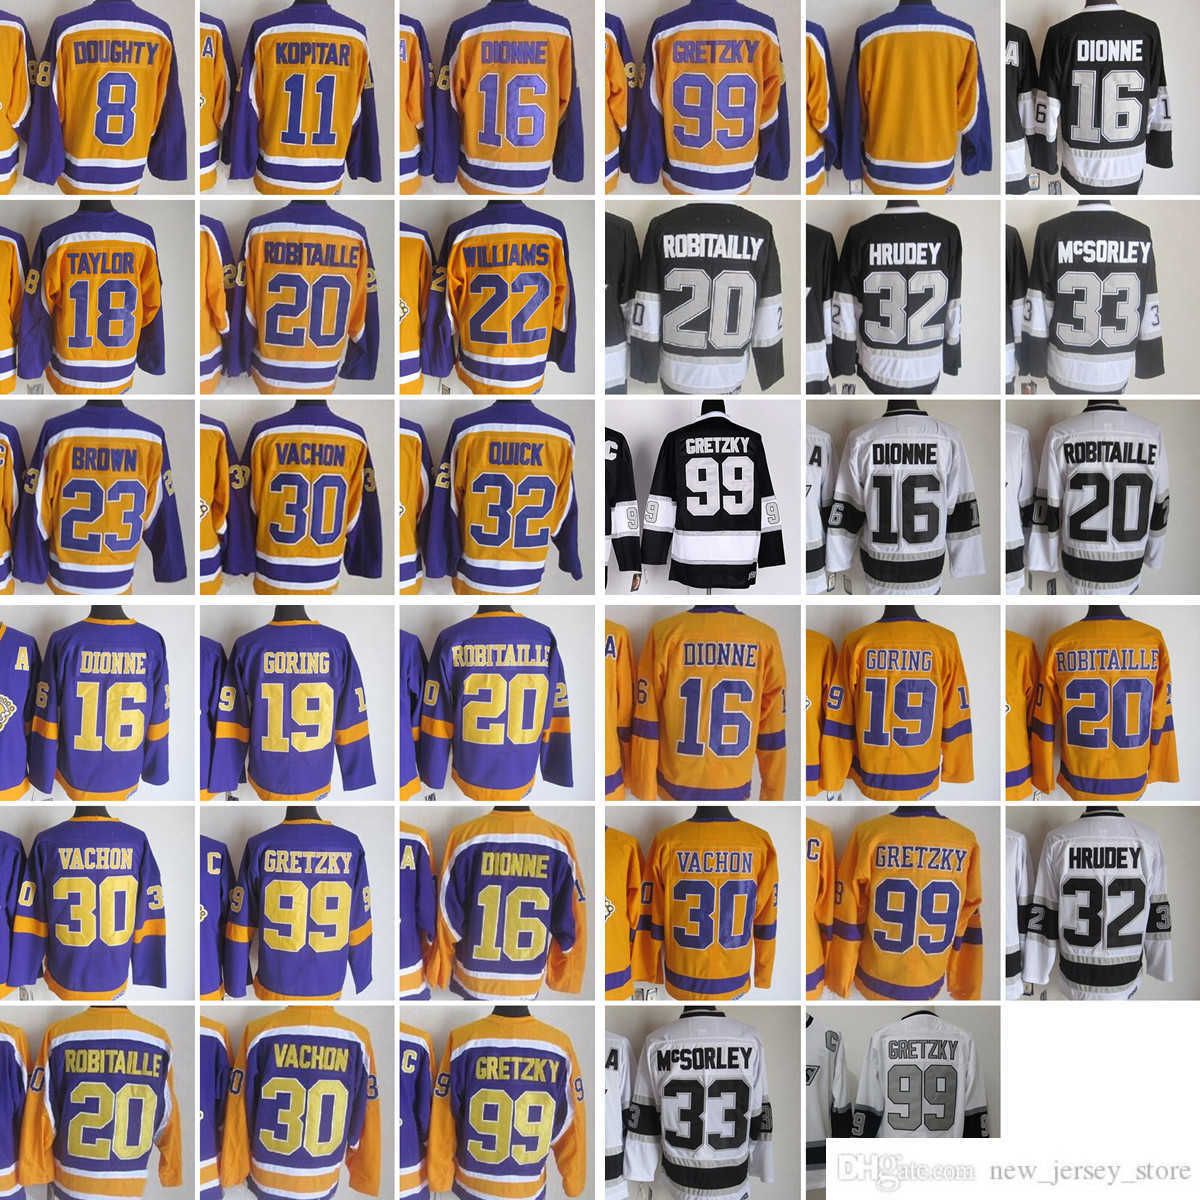 1967-1999 Movie Retro CCM Hockey Jersey broderie 99 Gretzky 8 Doughty 11 Anze Kopitar 16 Dionne 18 Taylor 19 Butch Goring 20 Robitaille 23 Brown 30 Vachon 32 Quick